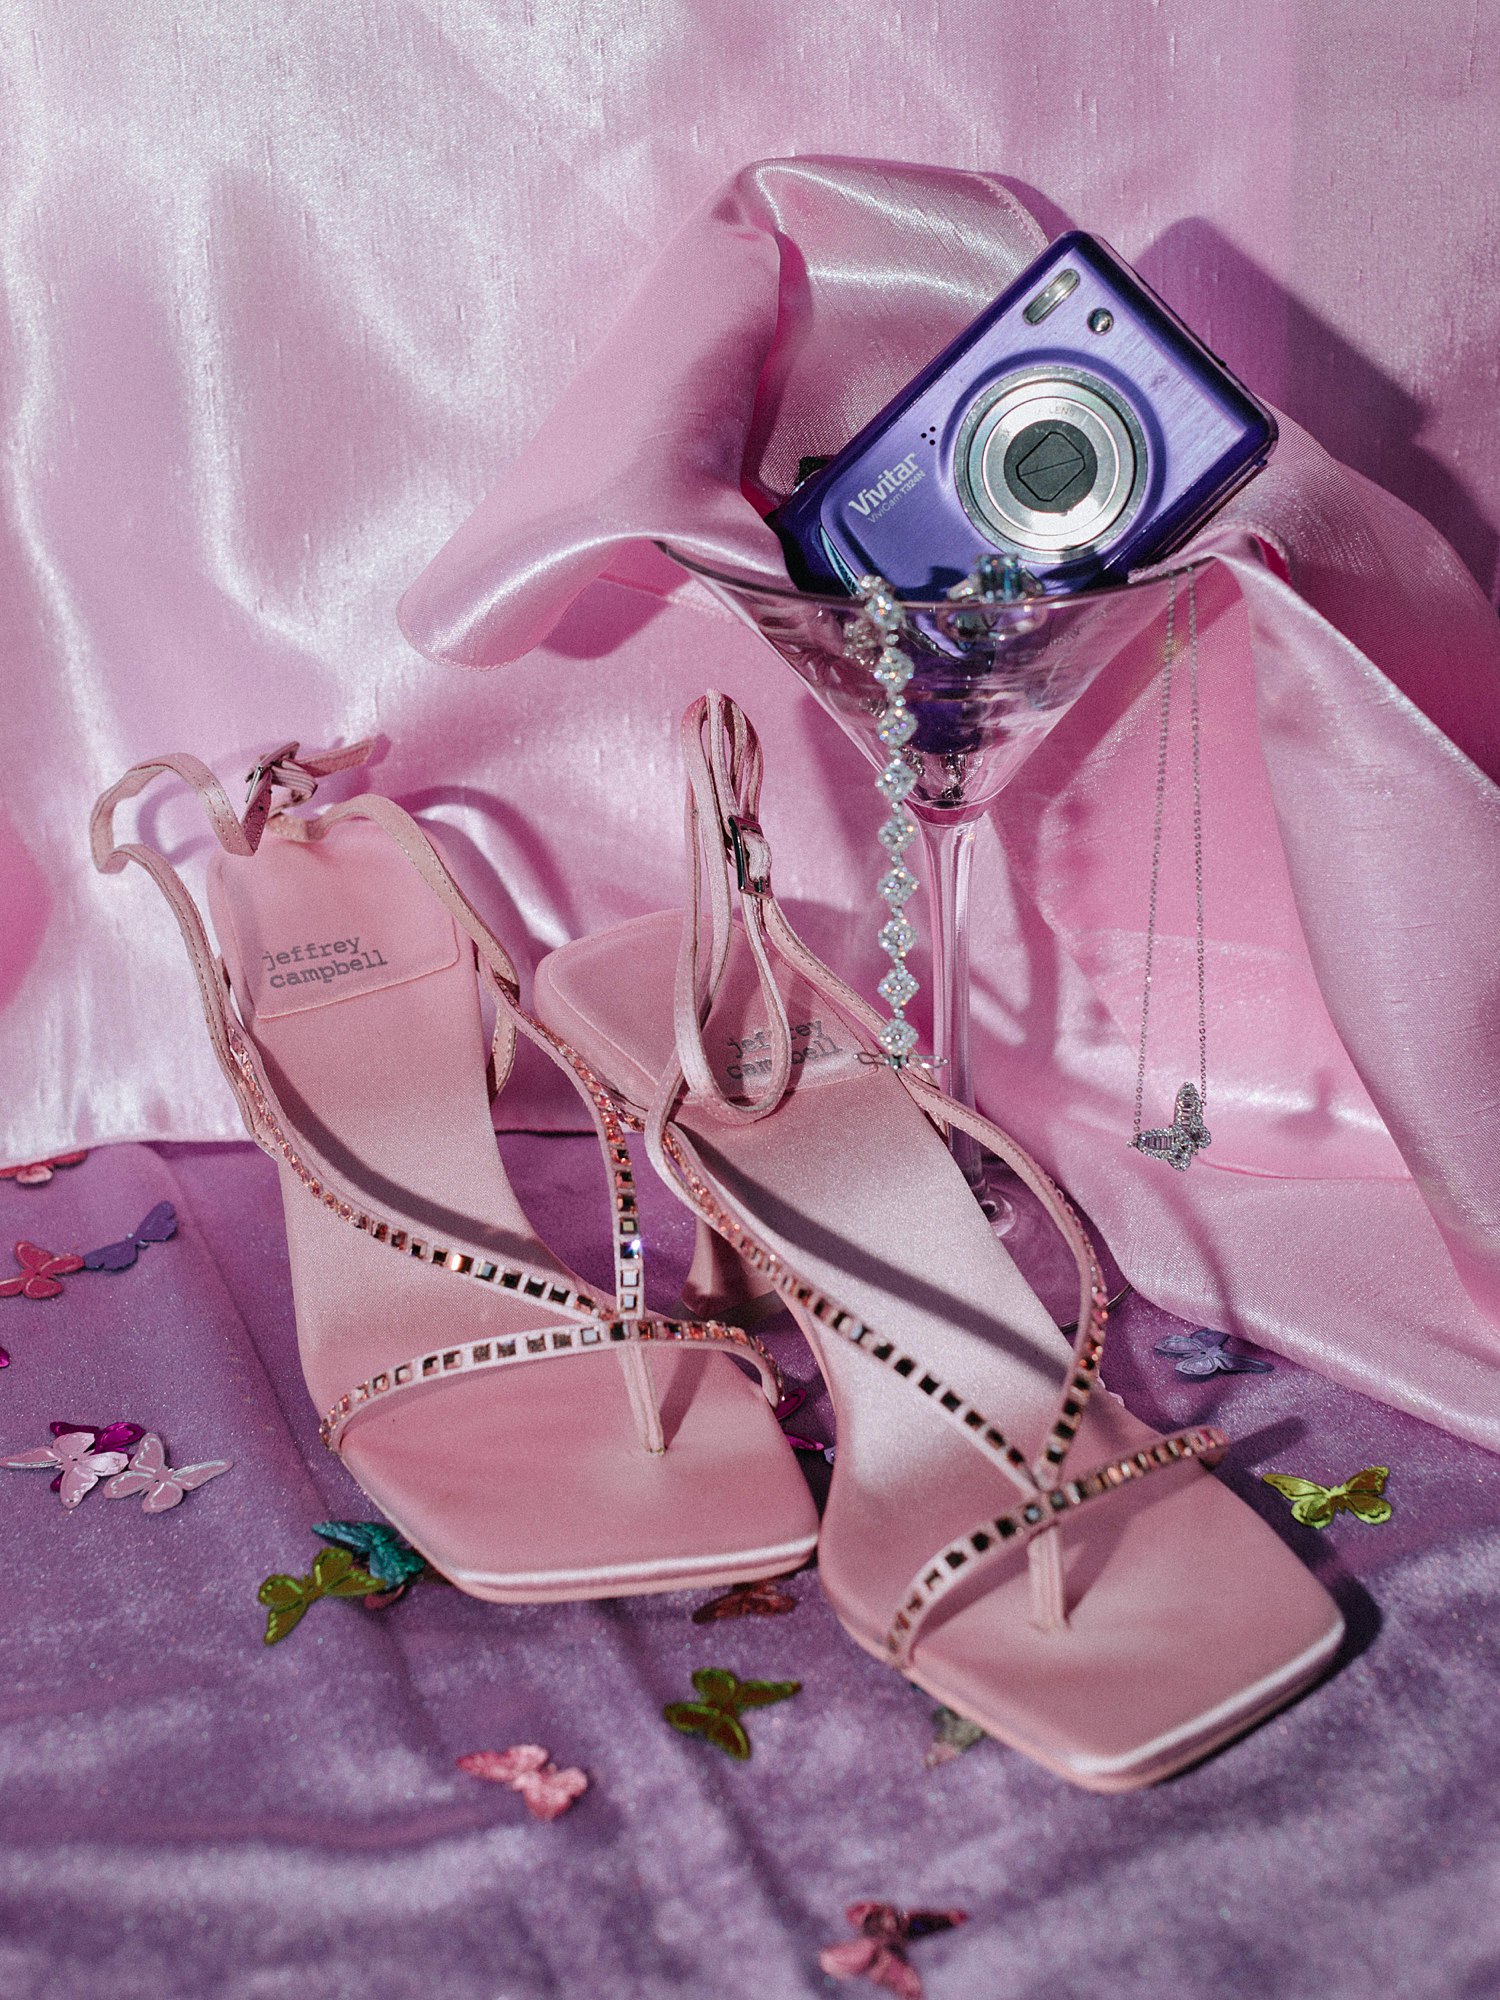 Digicam camera in martini glass next to pink heels and diamond bracelet, 2000's inspired wedding 